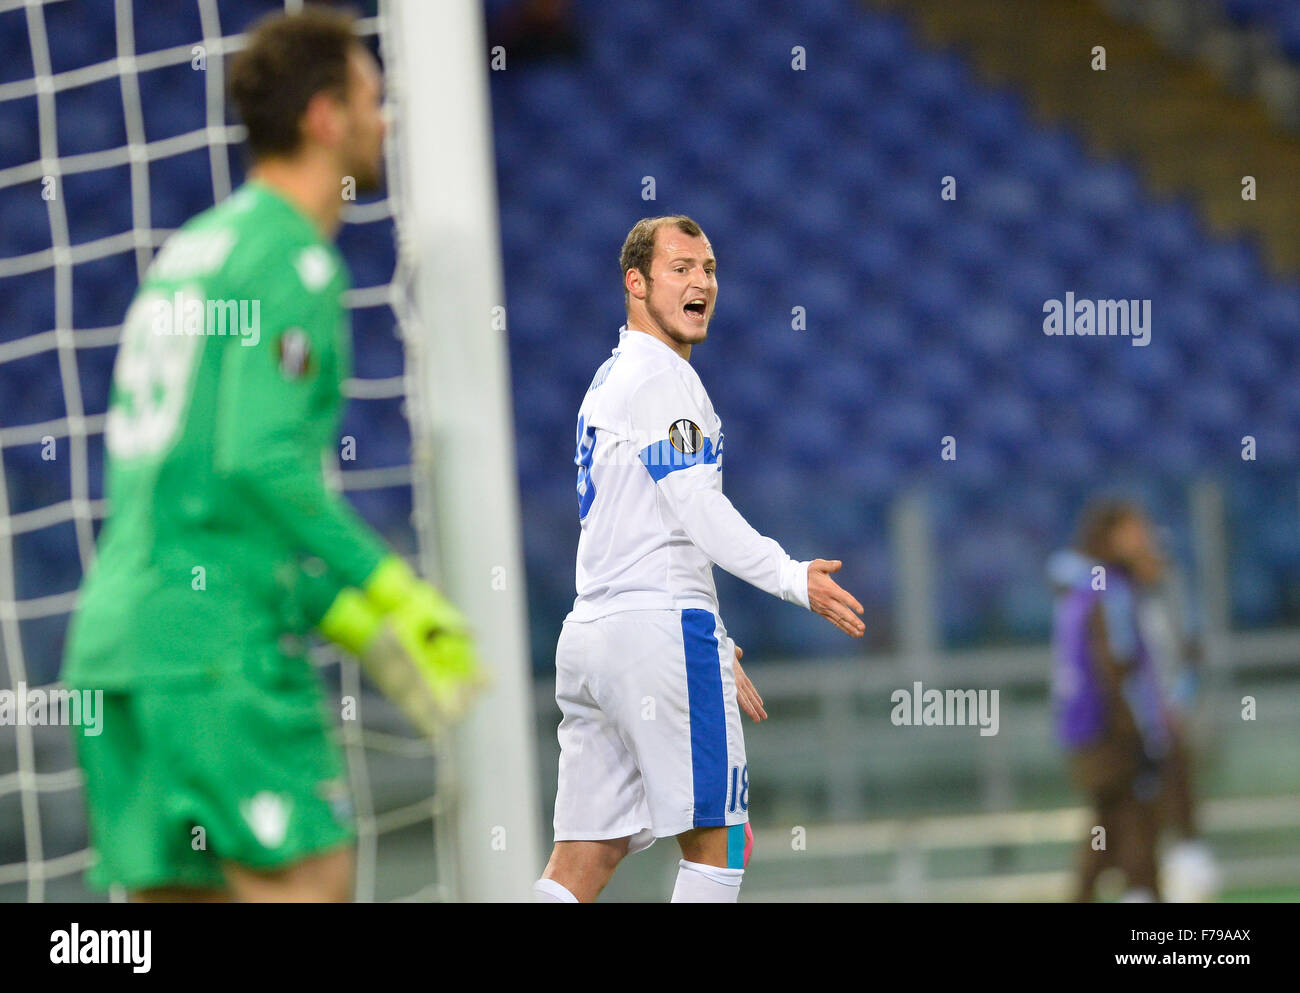 Rome, Italy. 26th November, 2015. Roman Zozulya during the Europe League football match S.S. Lazio vs F.C. Dnipro at the Olympic Stadium in Rome, on november 26, 2015 Credit:  Silvia Lore'/Alamy Live News Stock Photo